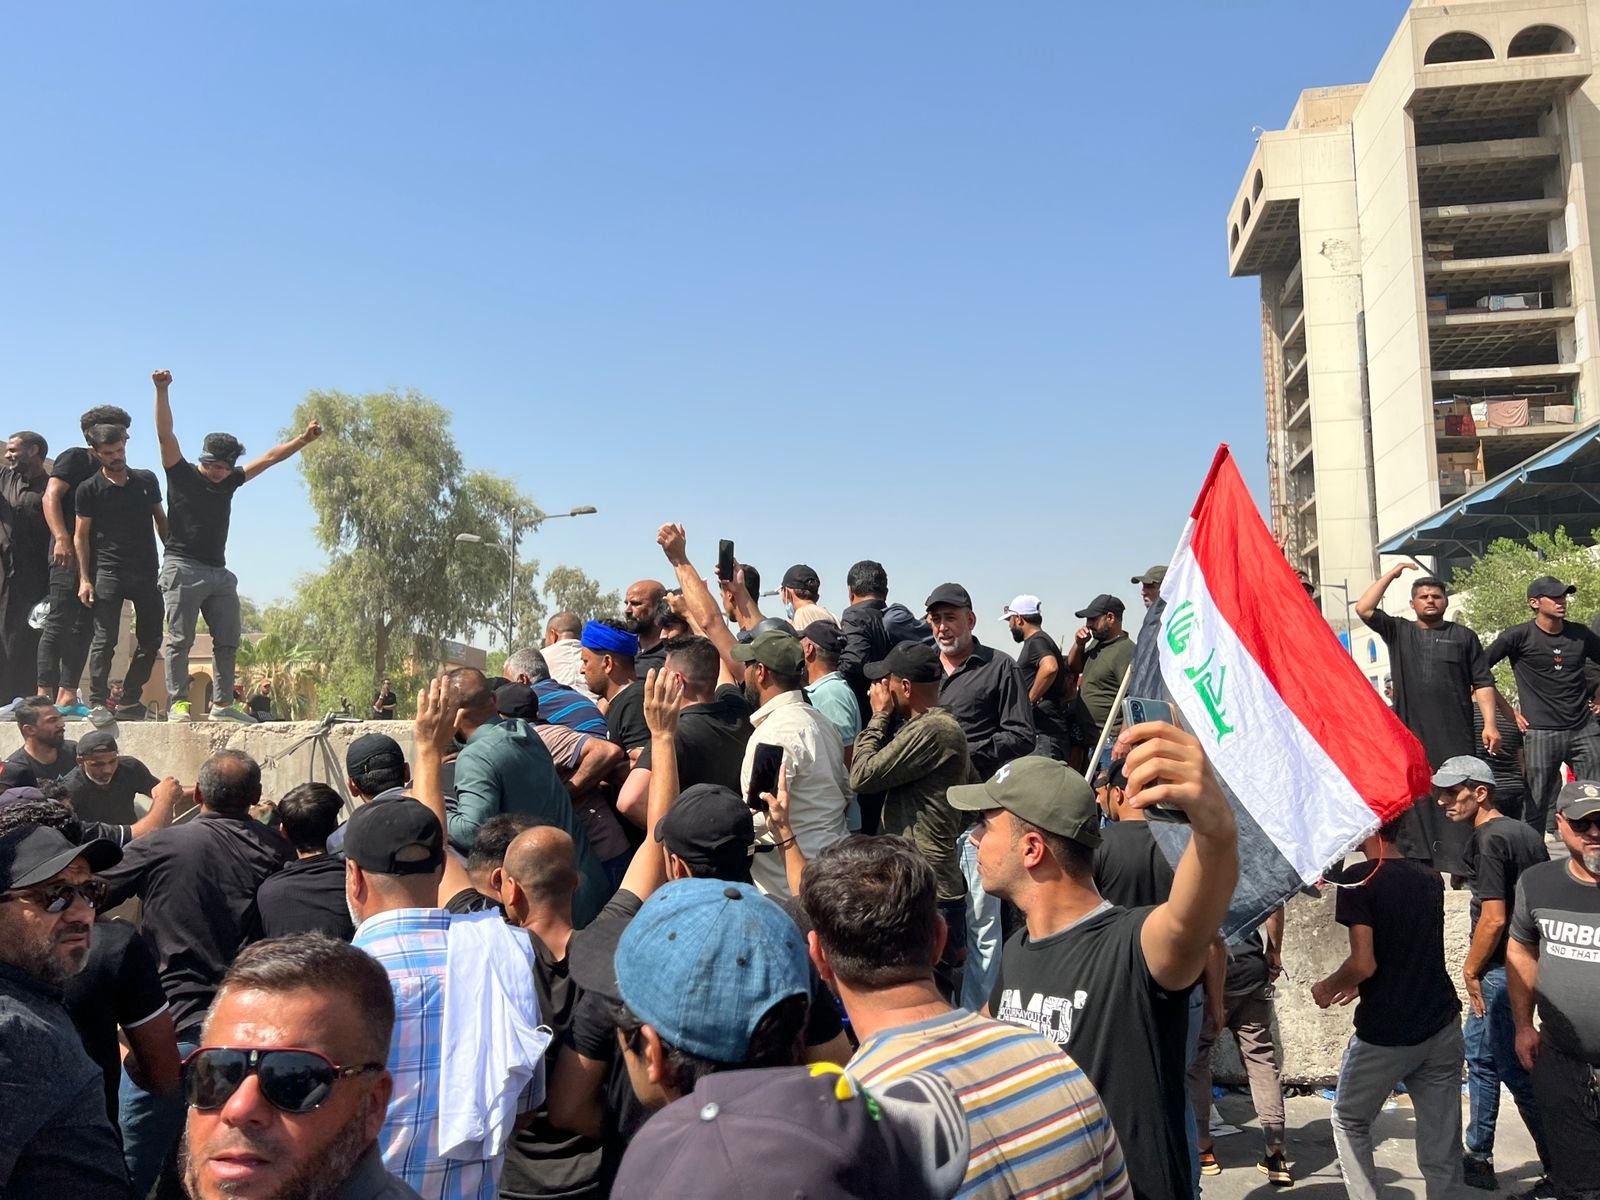 Crowds enter Baghdad's Green Zone in renewed political protests